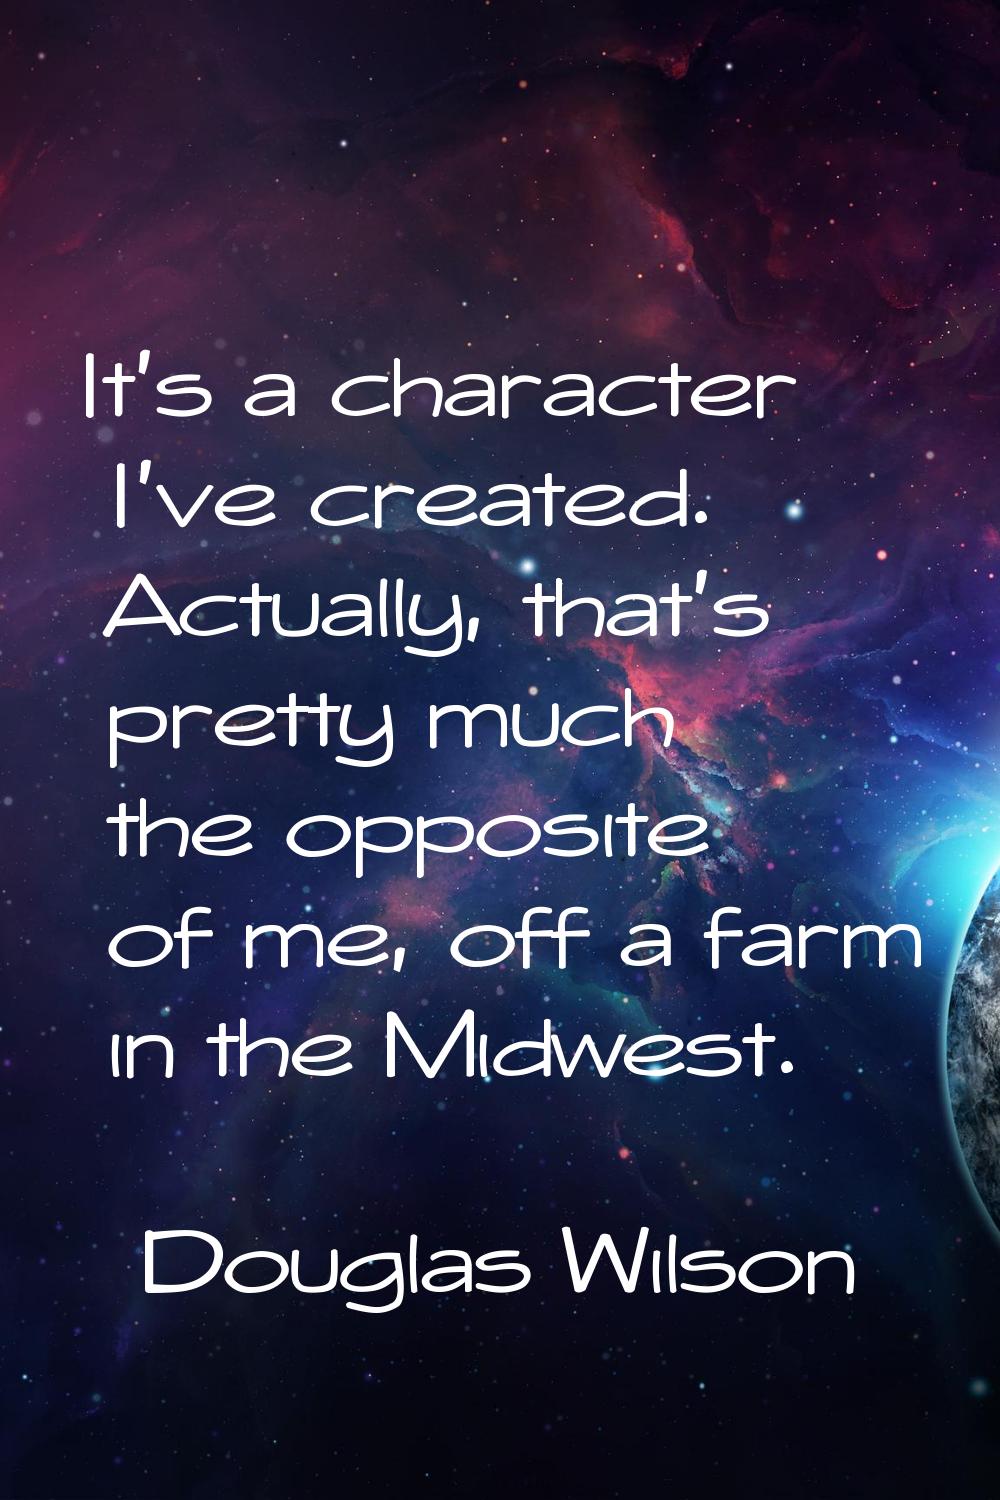 It's a character I've created. Actually, that's pretty much the opposite of me, off a farm in the M